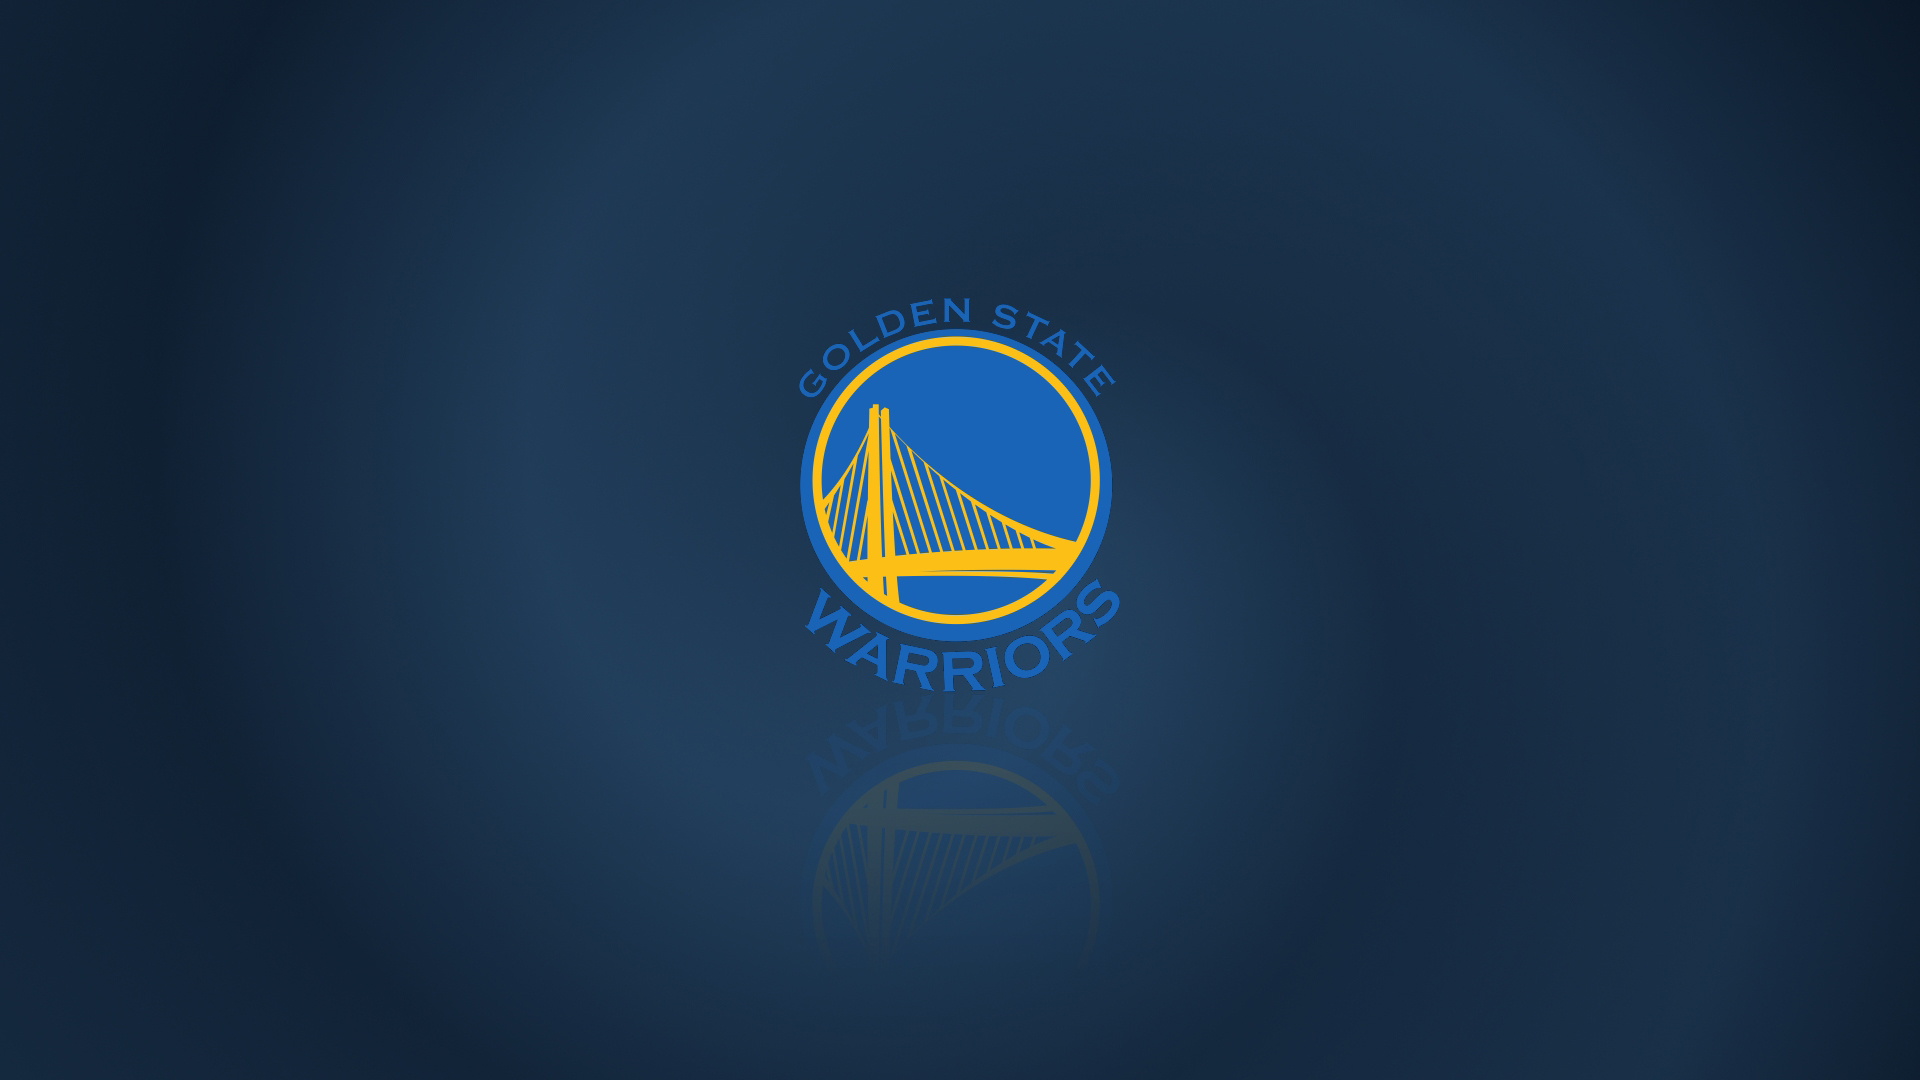 Golden State Warriors Wallpaper Image Photos Pictures